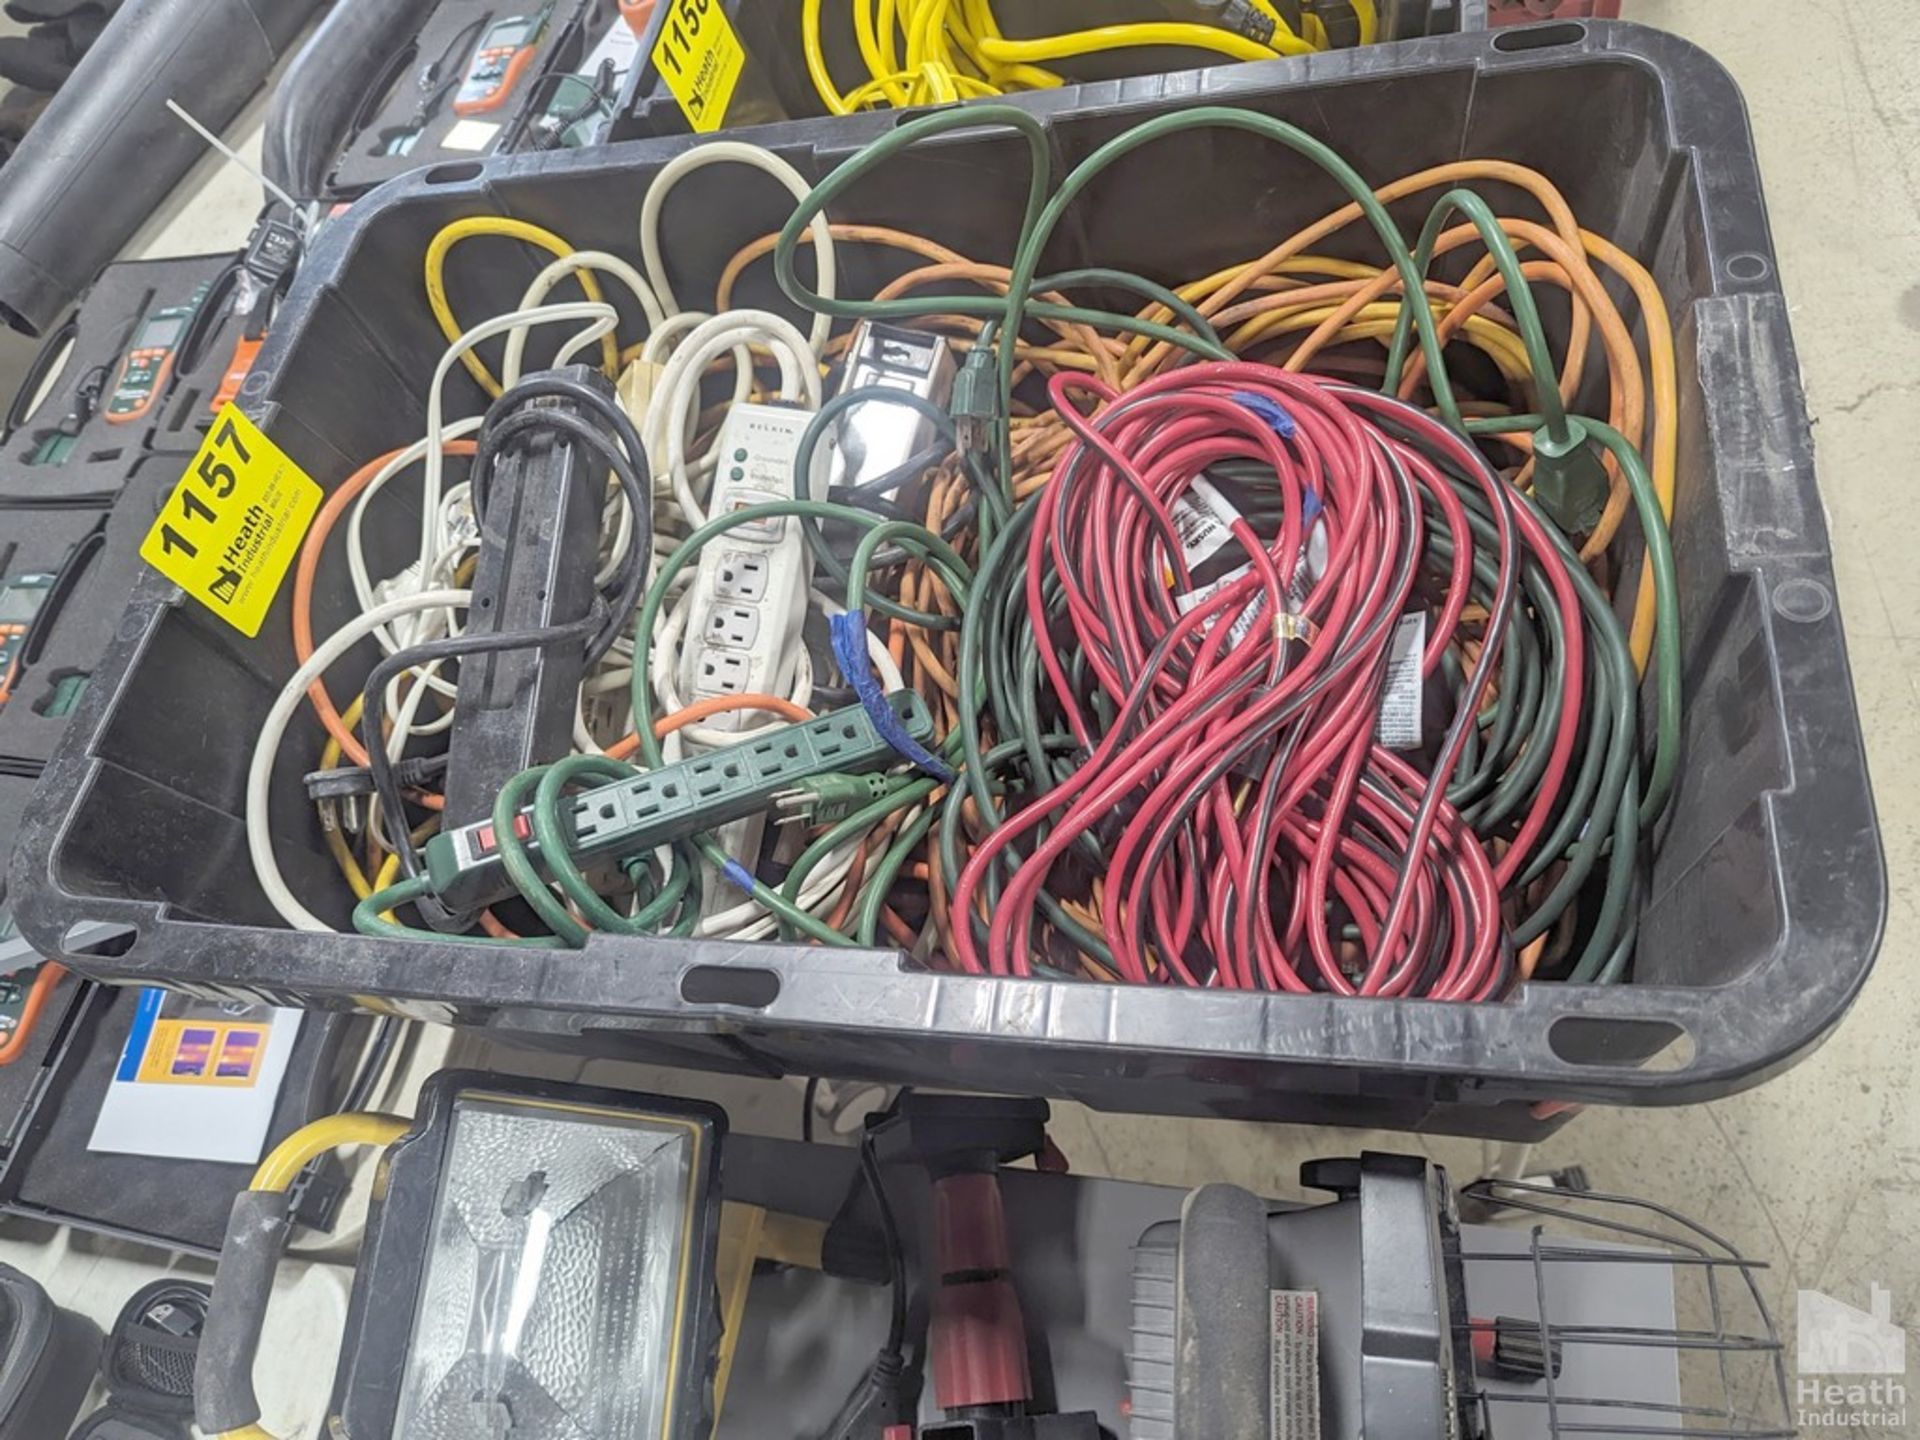 LARGE QUANTITY OF ELECTICAL EXTENSION CORDS AND POWER STRIPS IN TOTE